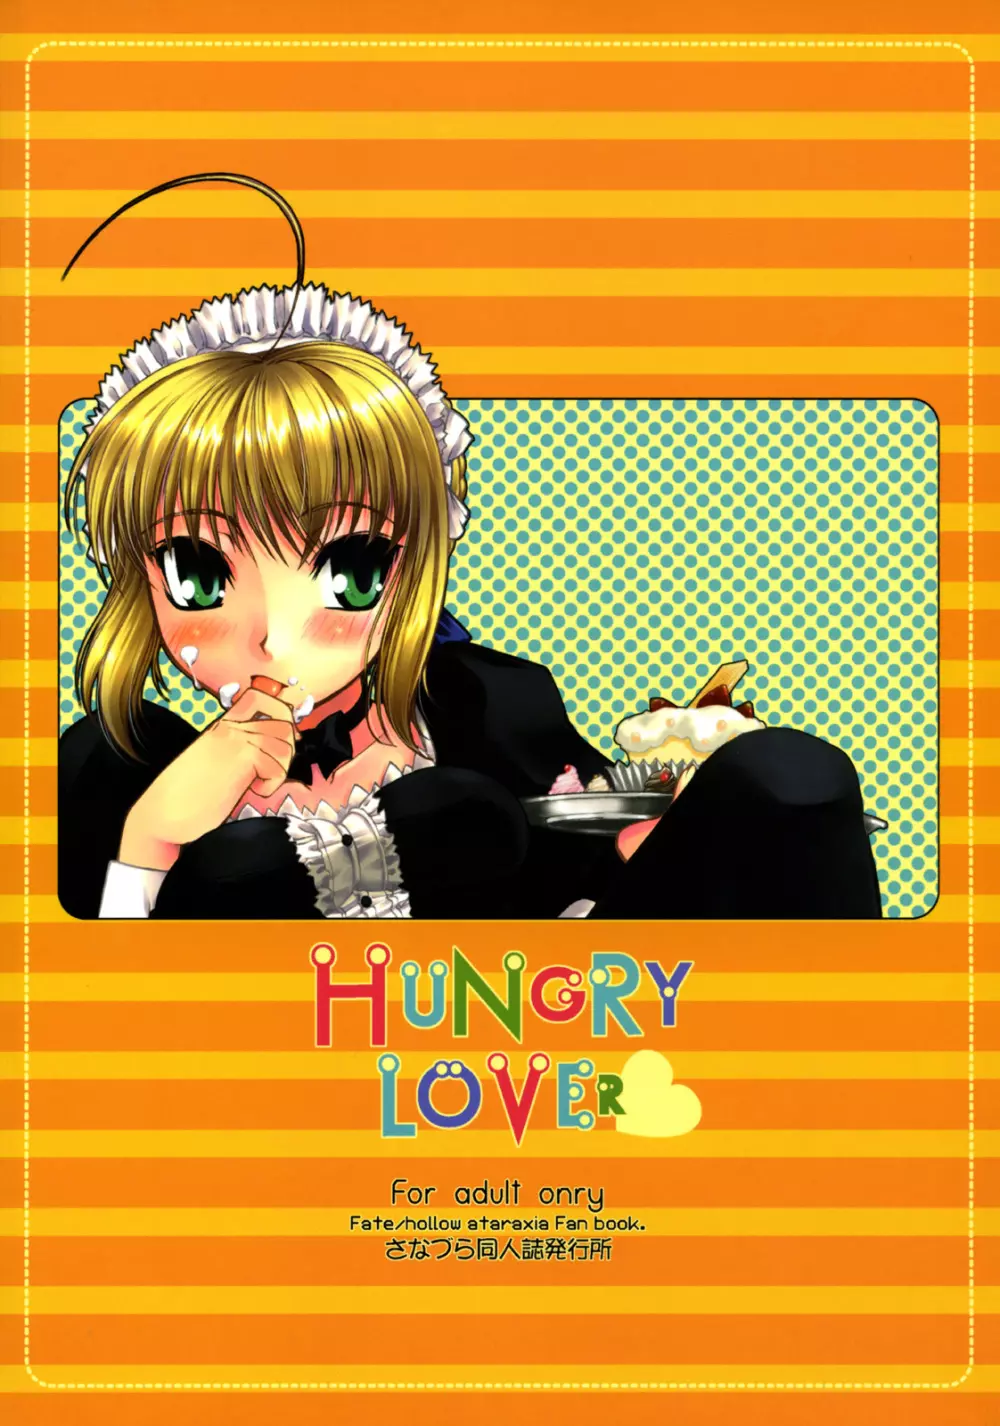 HUNGRY LOVER 48ページ